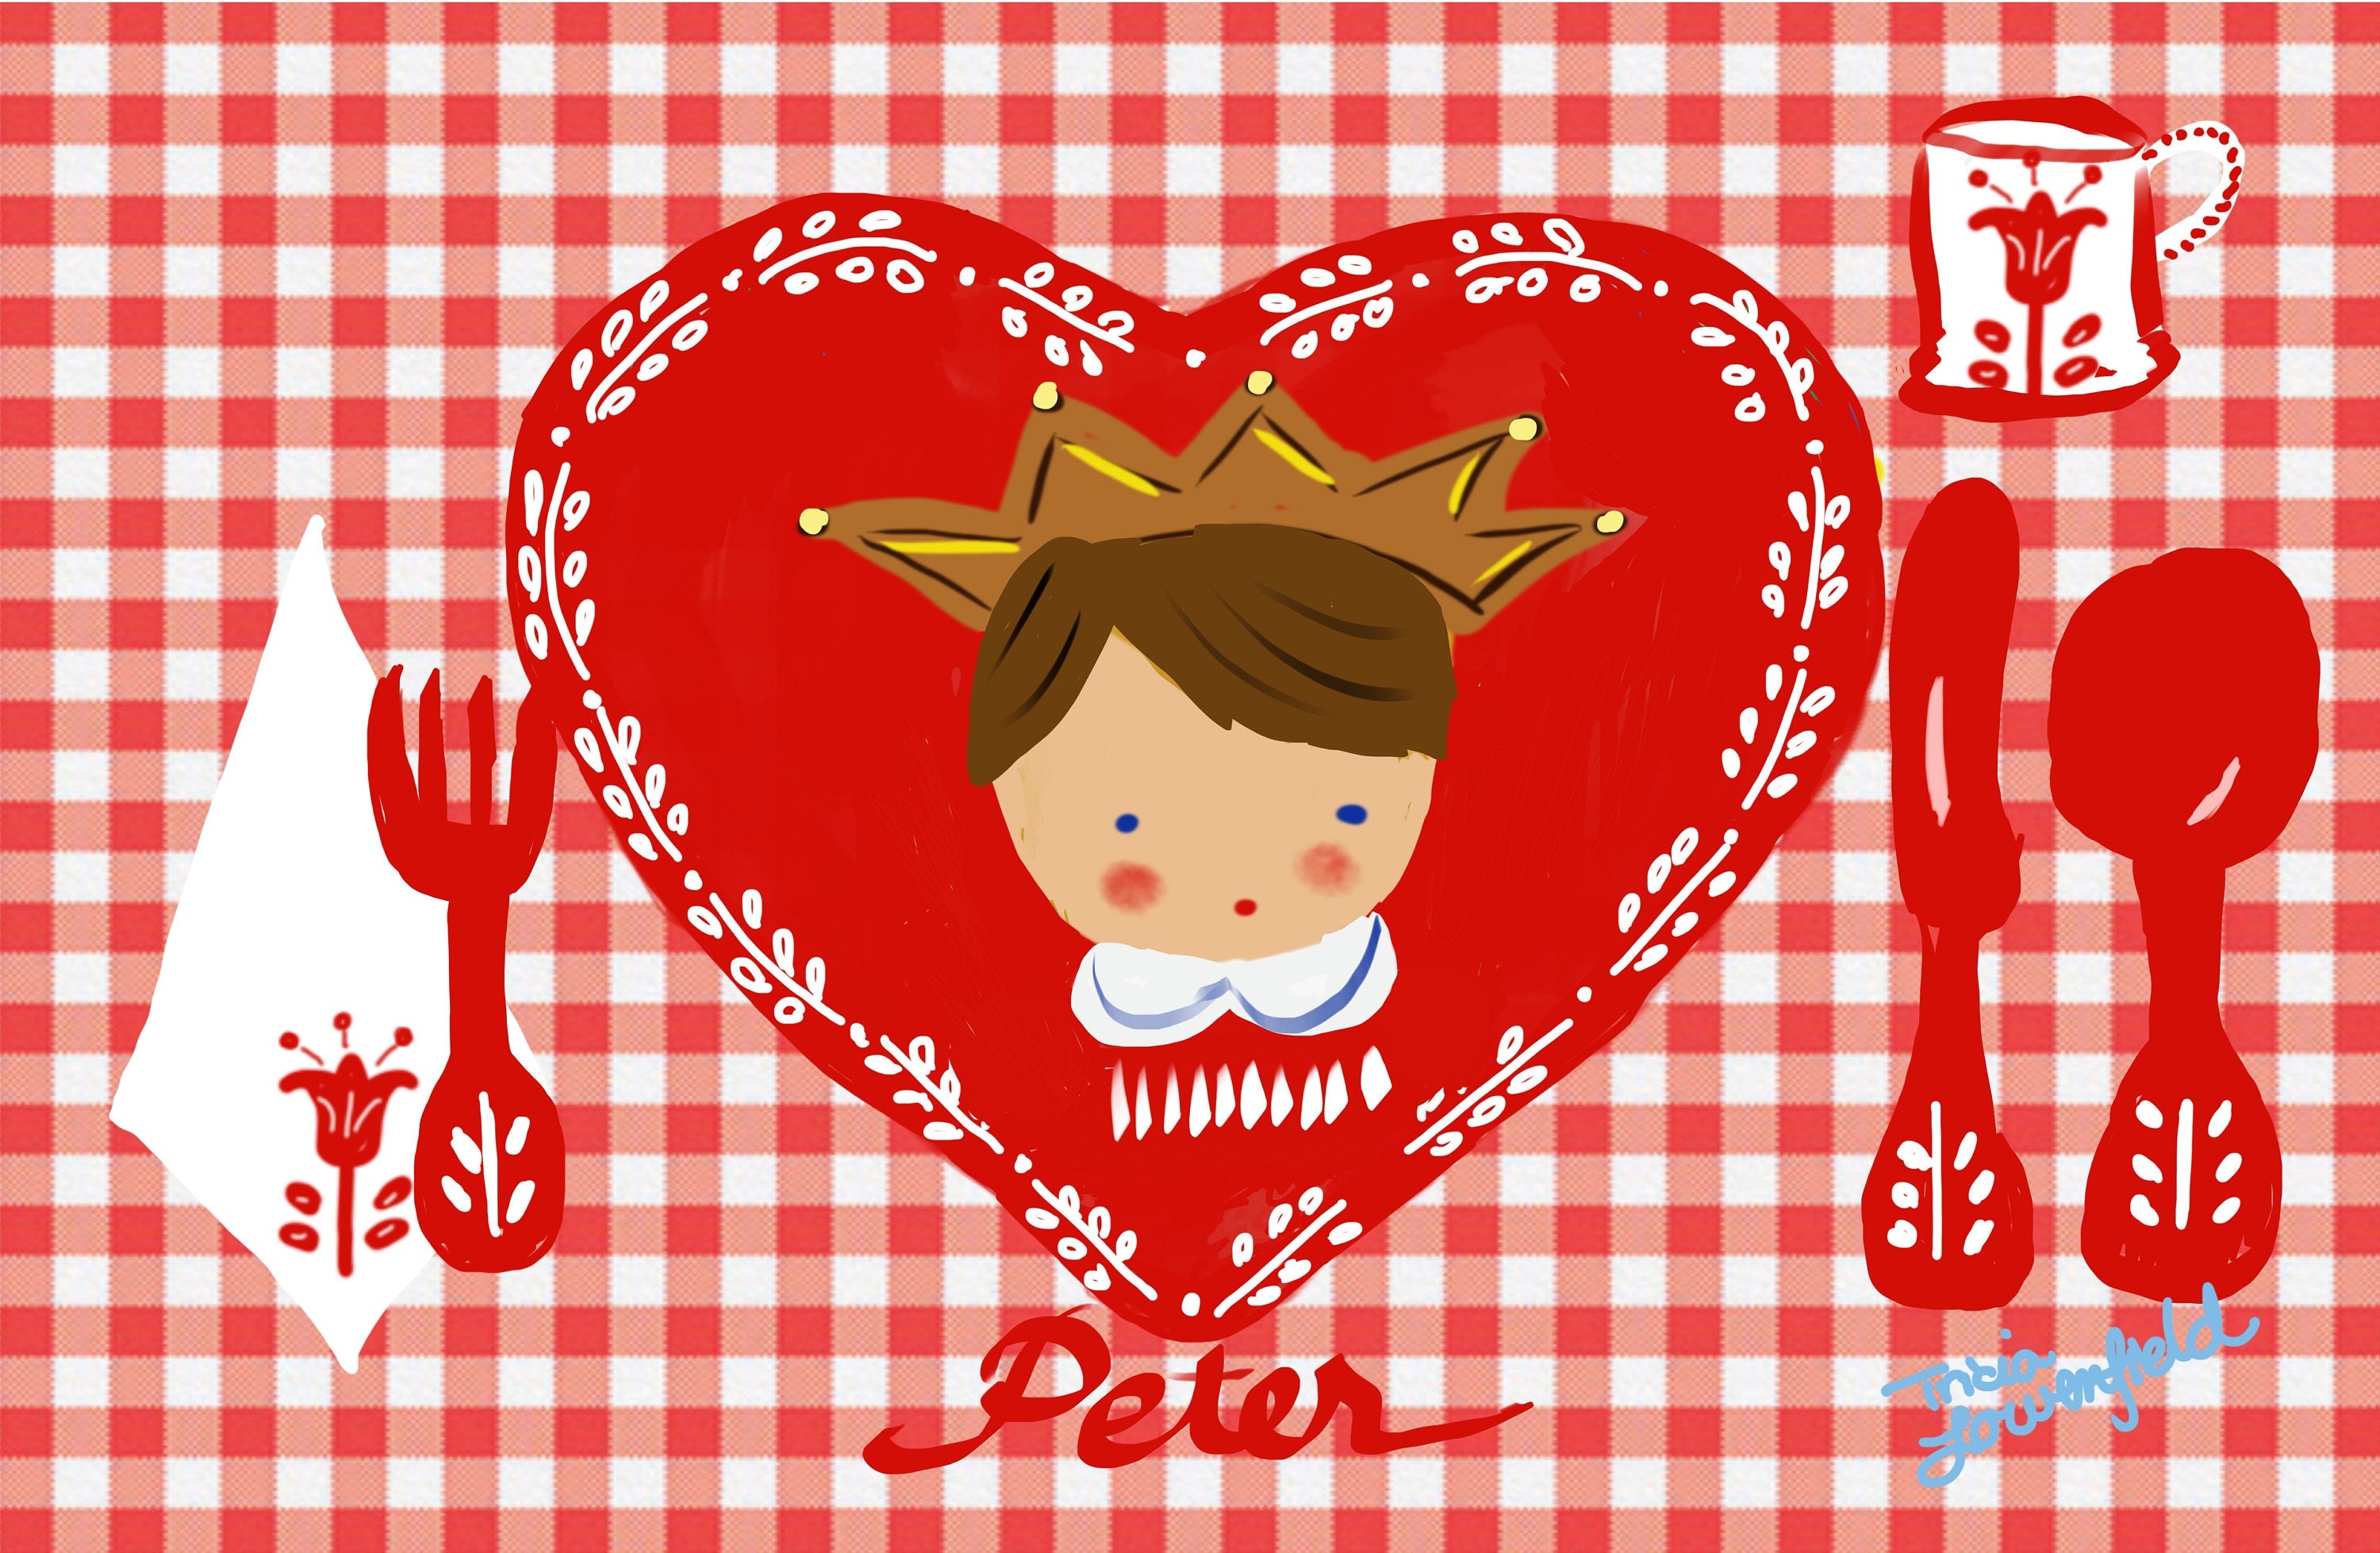 Laminated Placemat - Heart Boy with Crown - Tricia Lowenfield Design